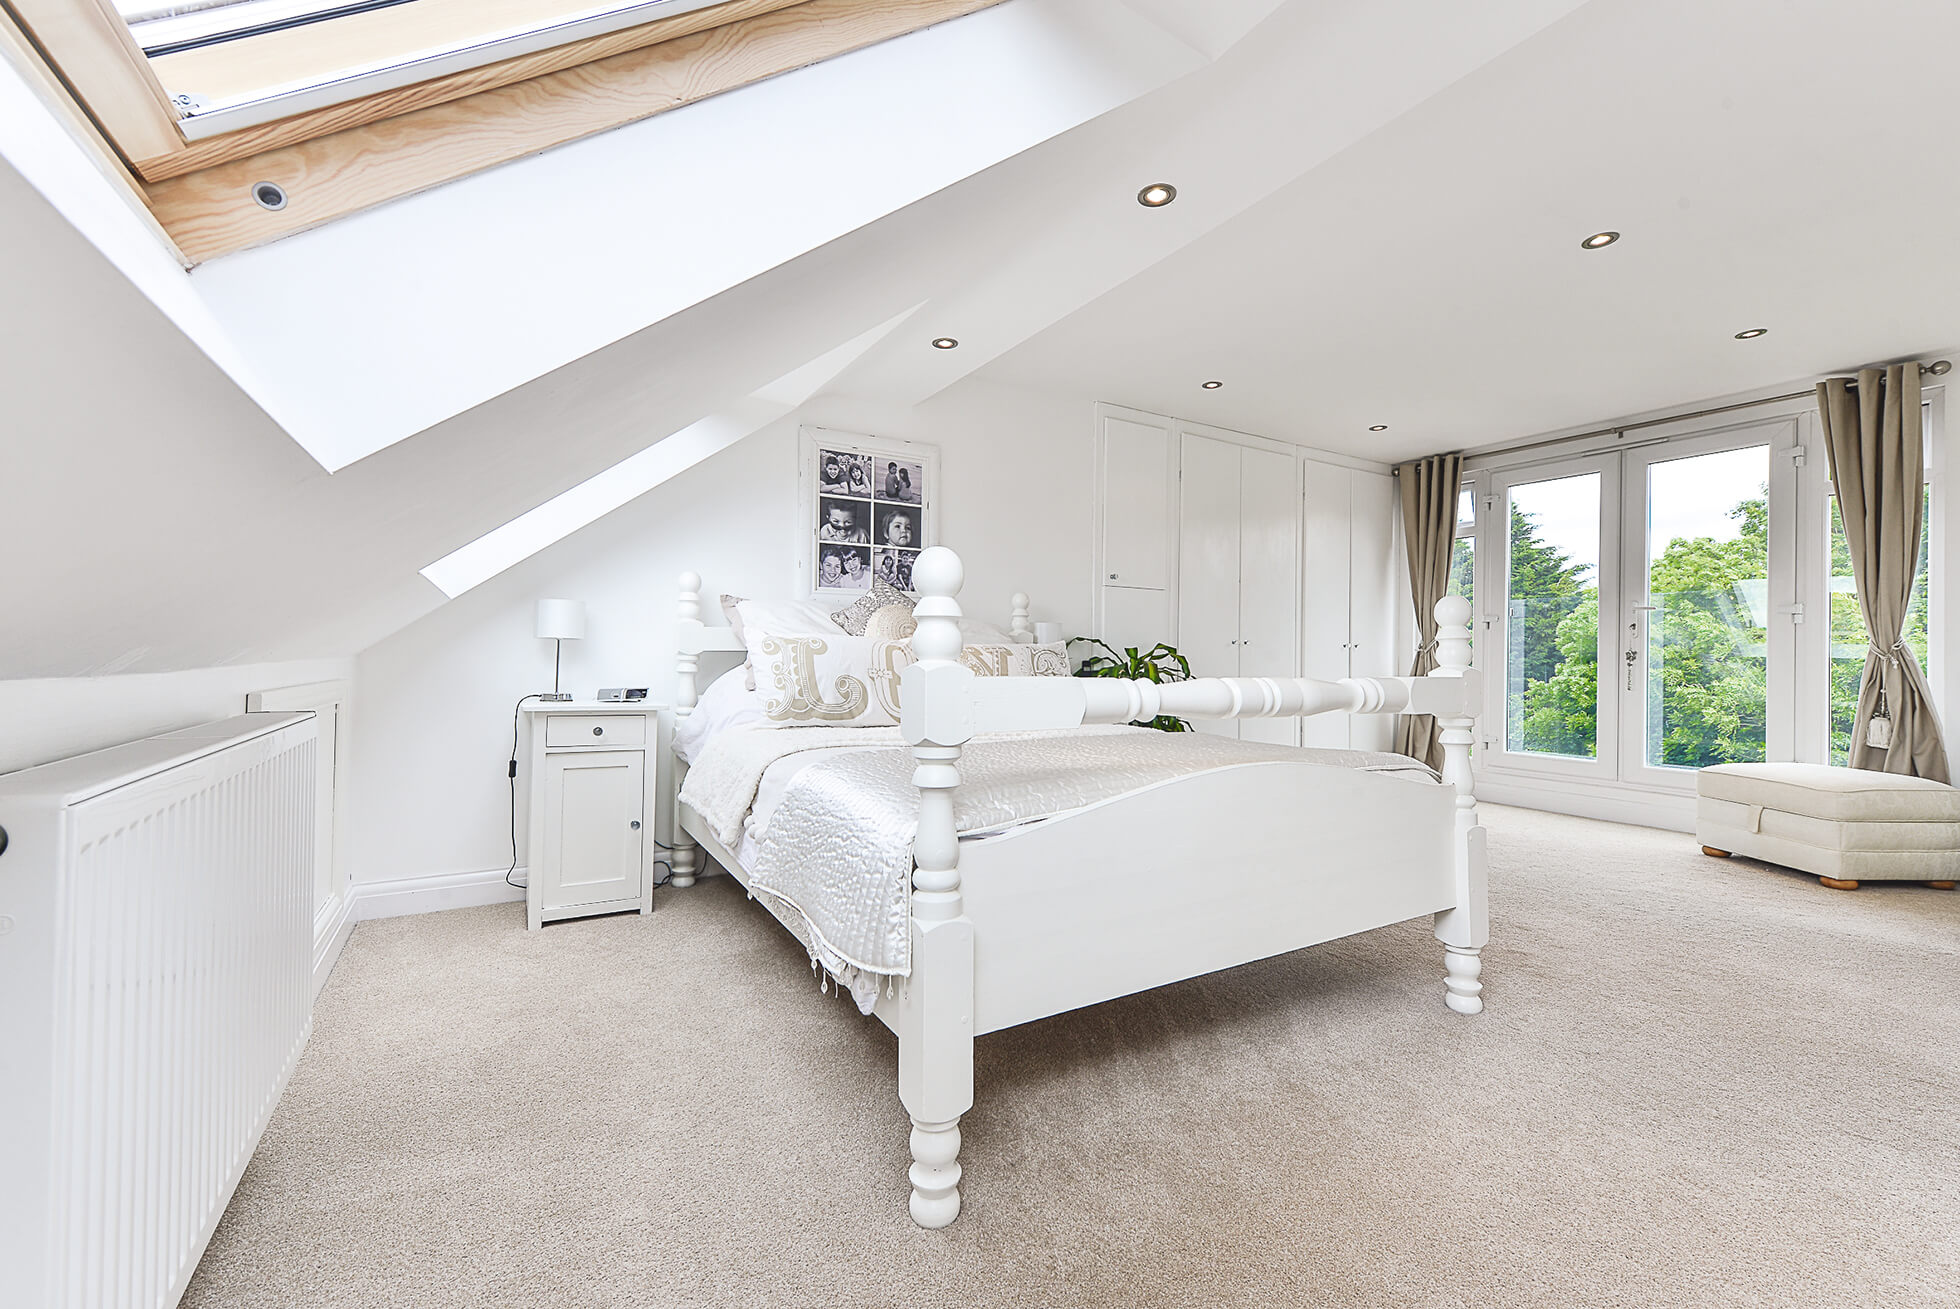 Do you have a question about converting your Loft in Bower Heath? Here are the most popular questions asked by our clients.